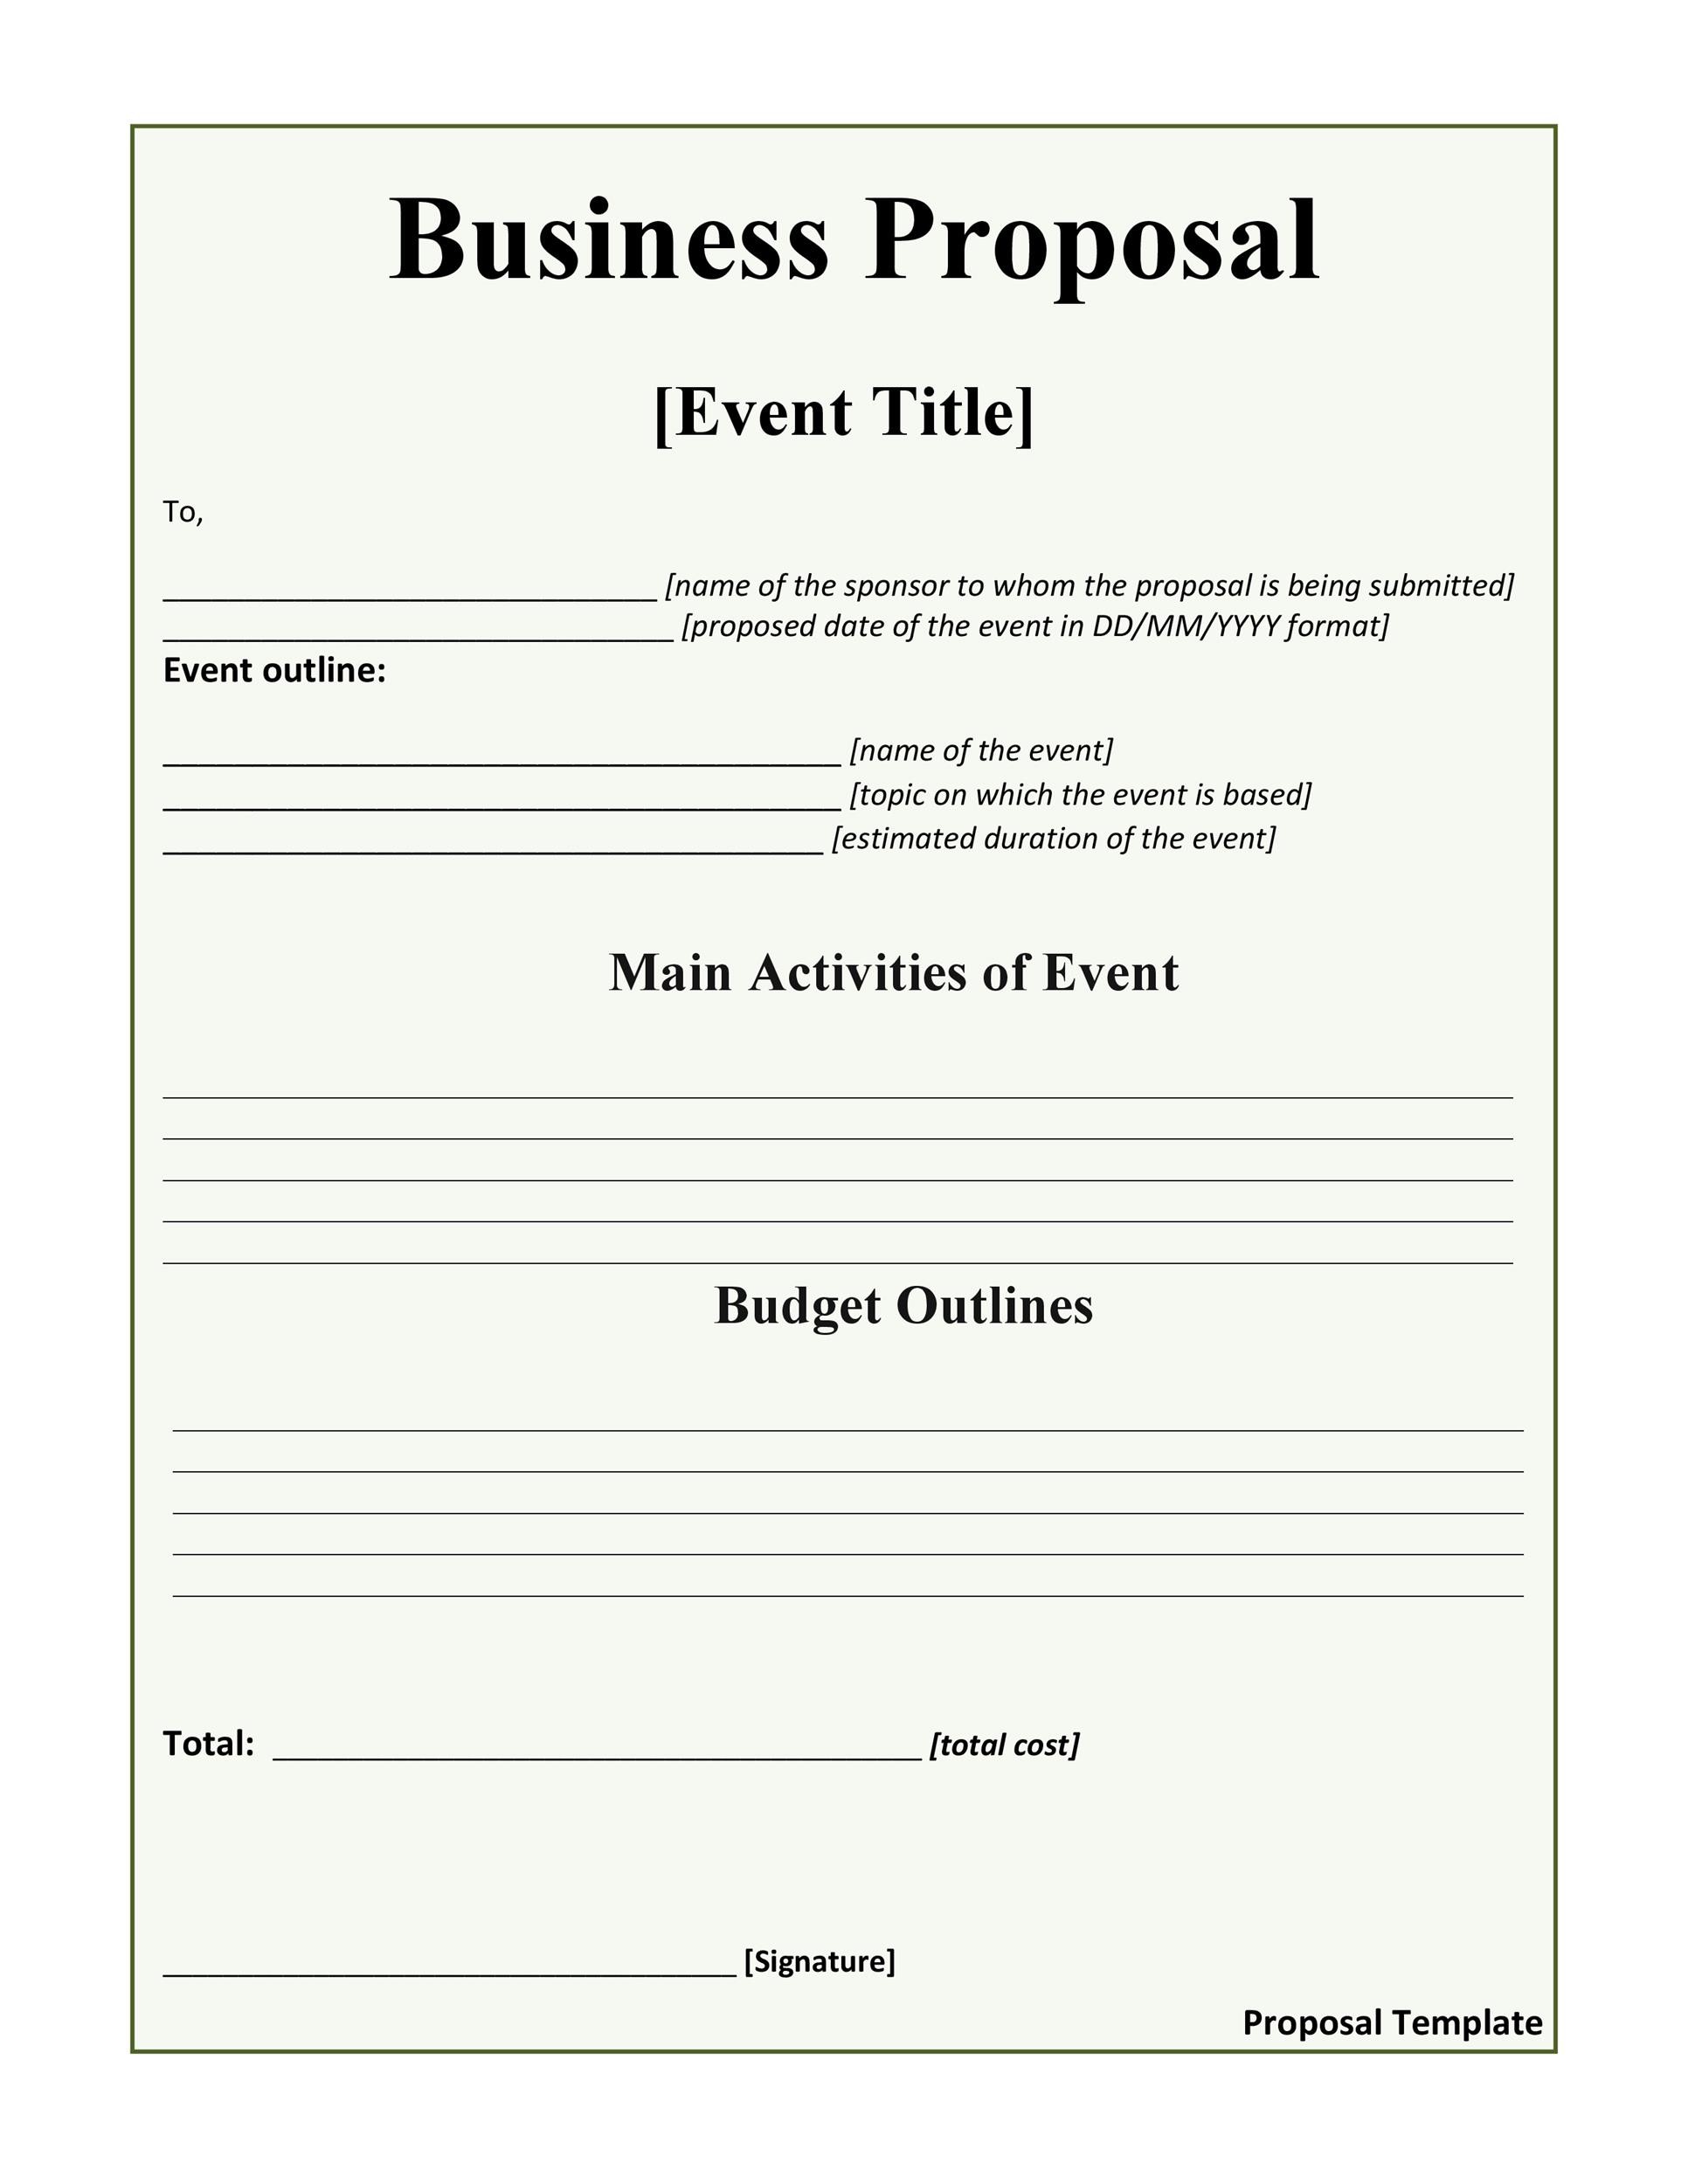 Template for writing a business proposal